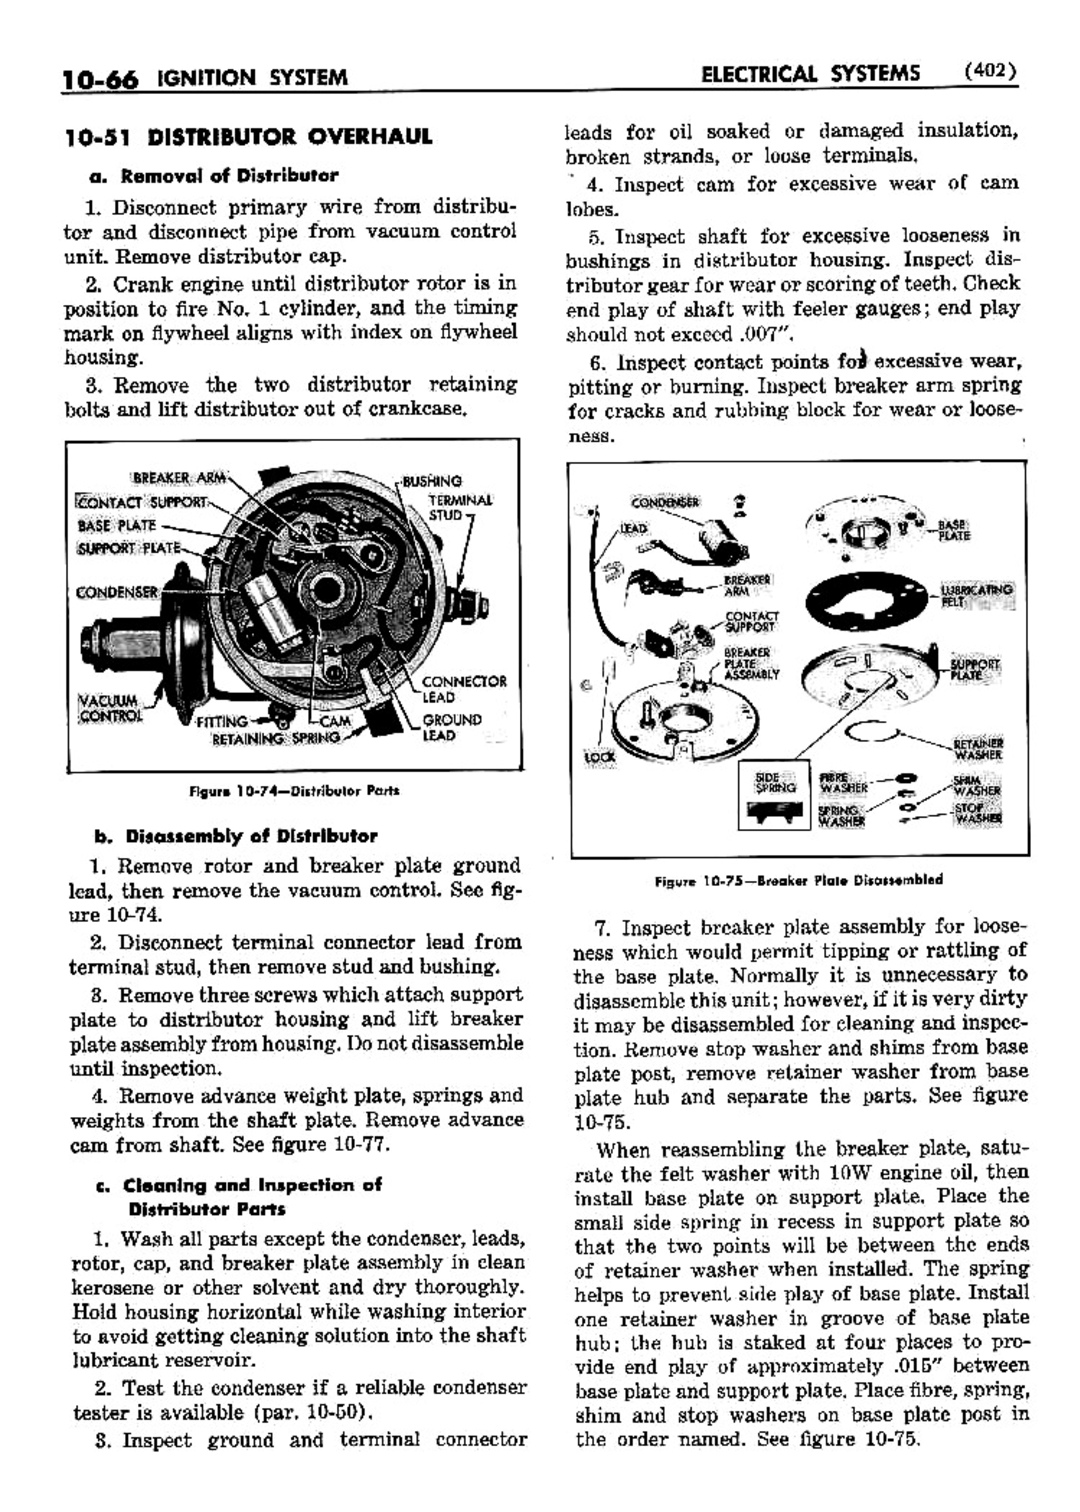 n_11 1952 Buick Shop Manual - Electrical Systems-066-066.jpg